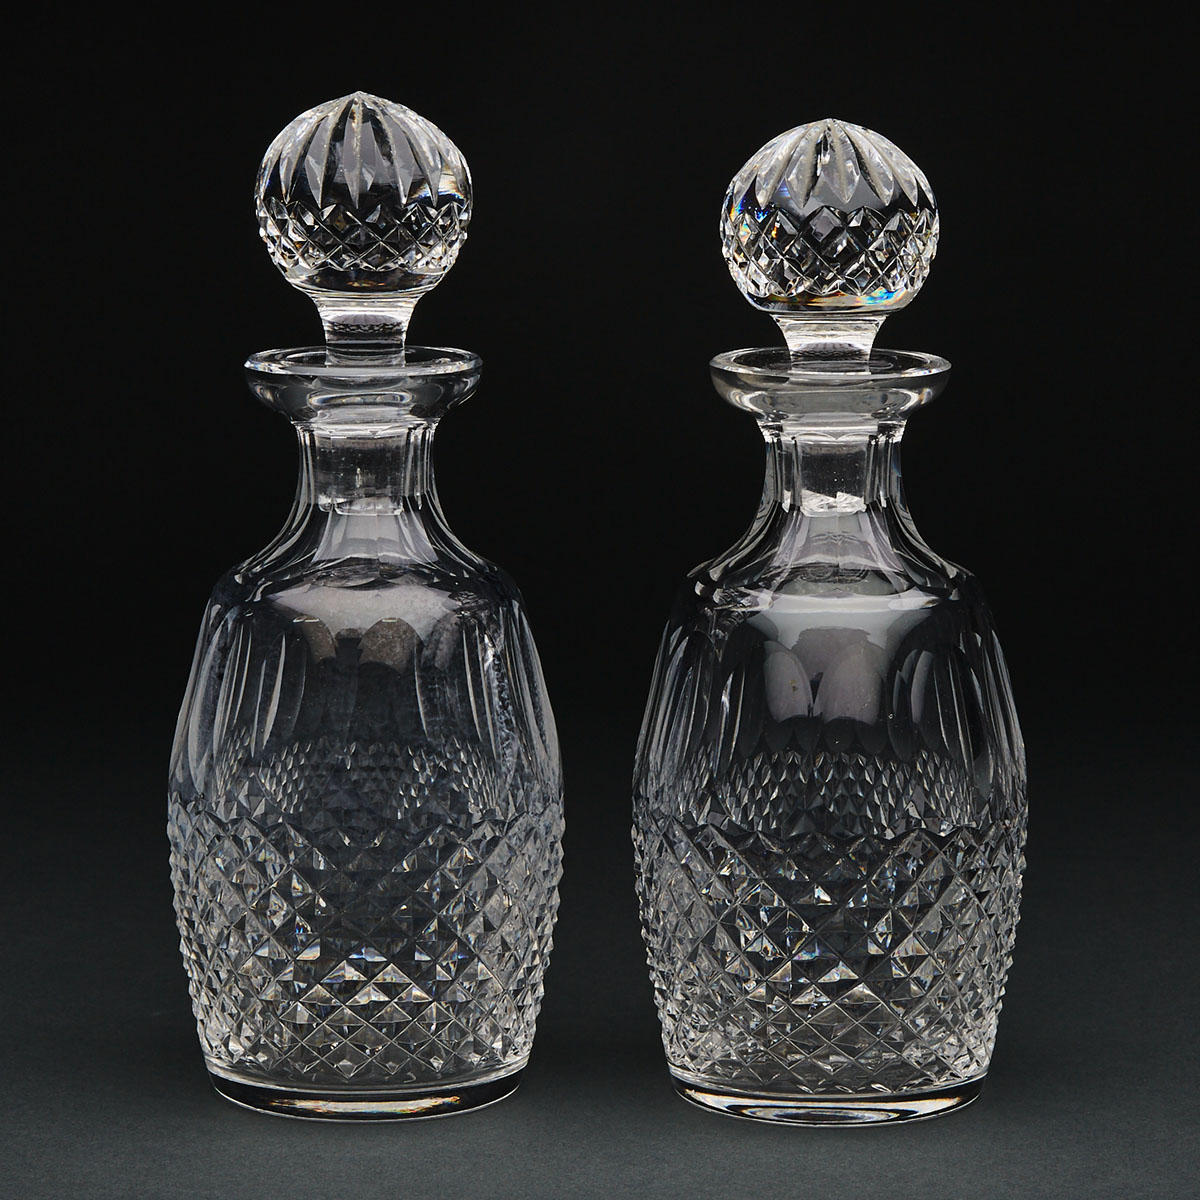 Pair of Waterford ‘Colleen’ Pattern Cut Glass Decanters, 20th century